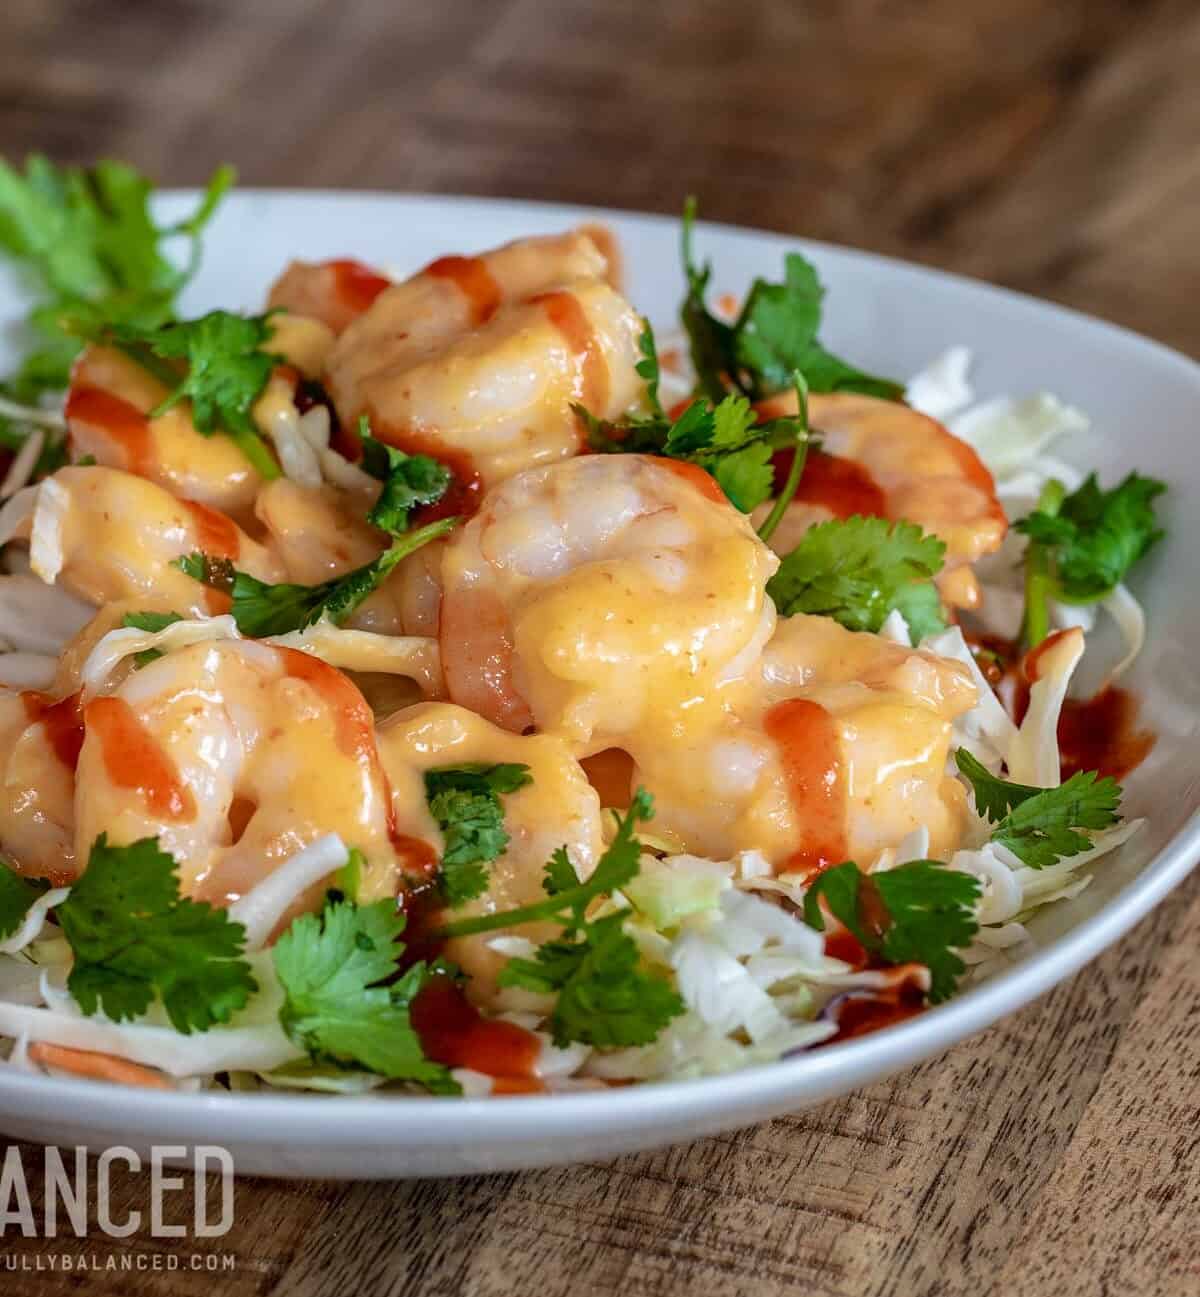  Crisp, marinated shrimp tossed with a creamy, spicy sauce